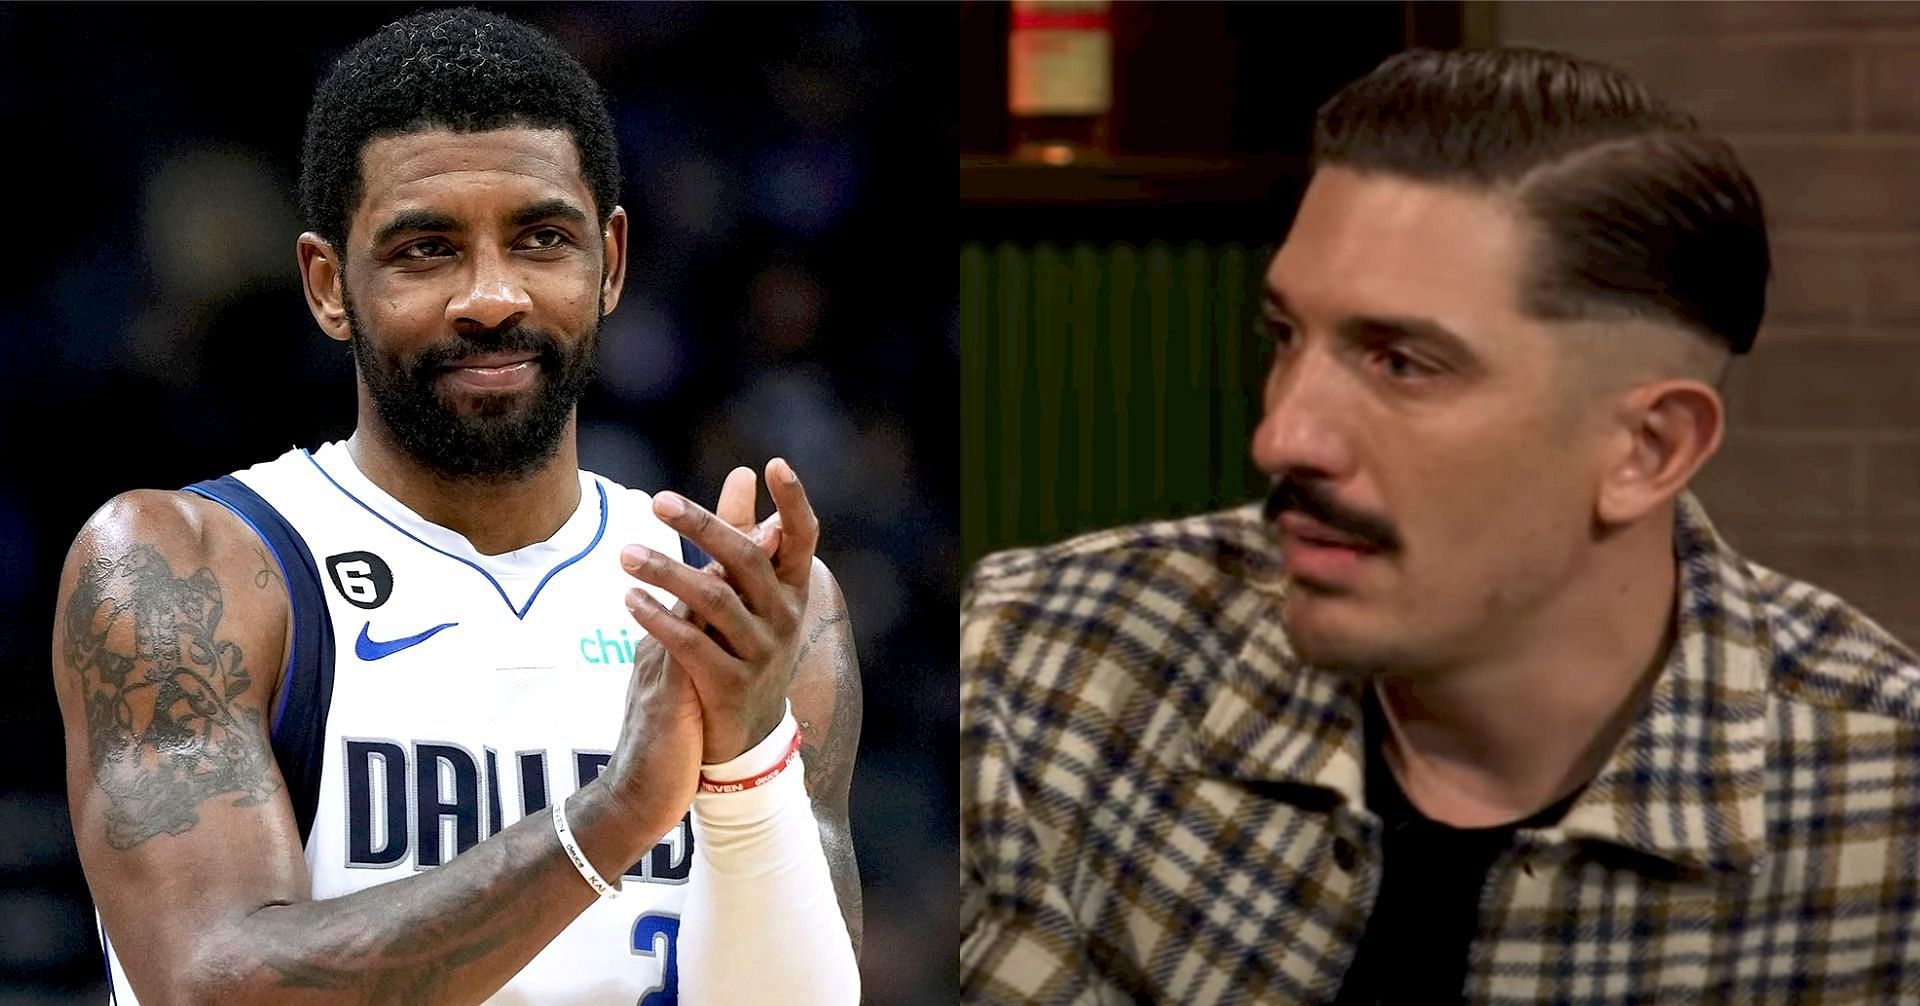 Dallas Mavericks star point guard Kyrie Irving and comedian Andrew Schulz